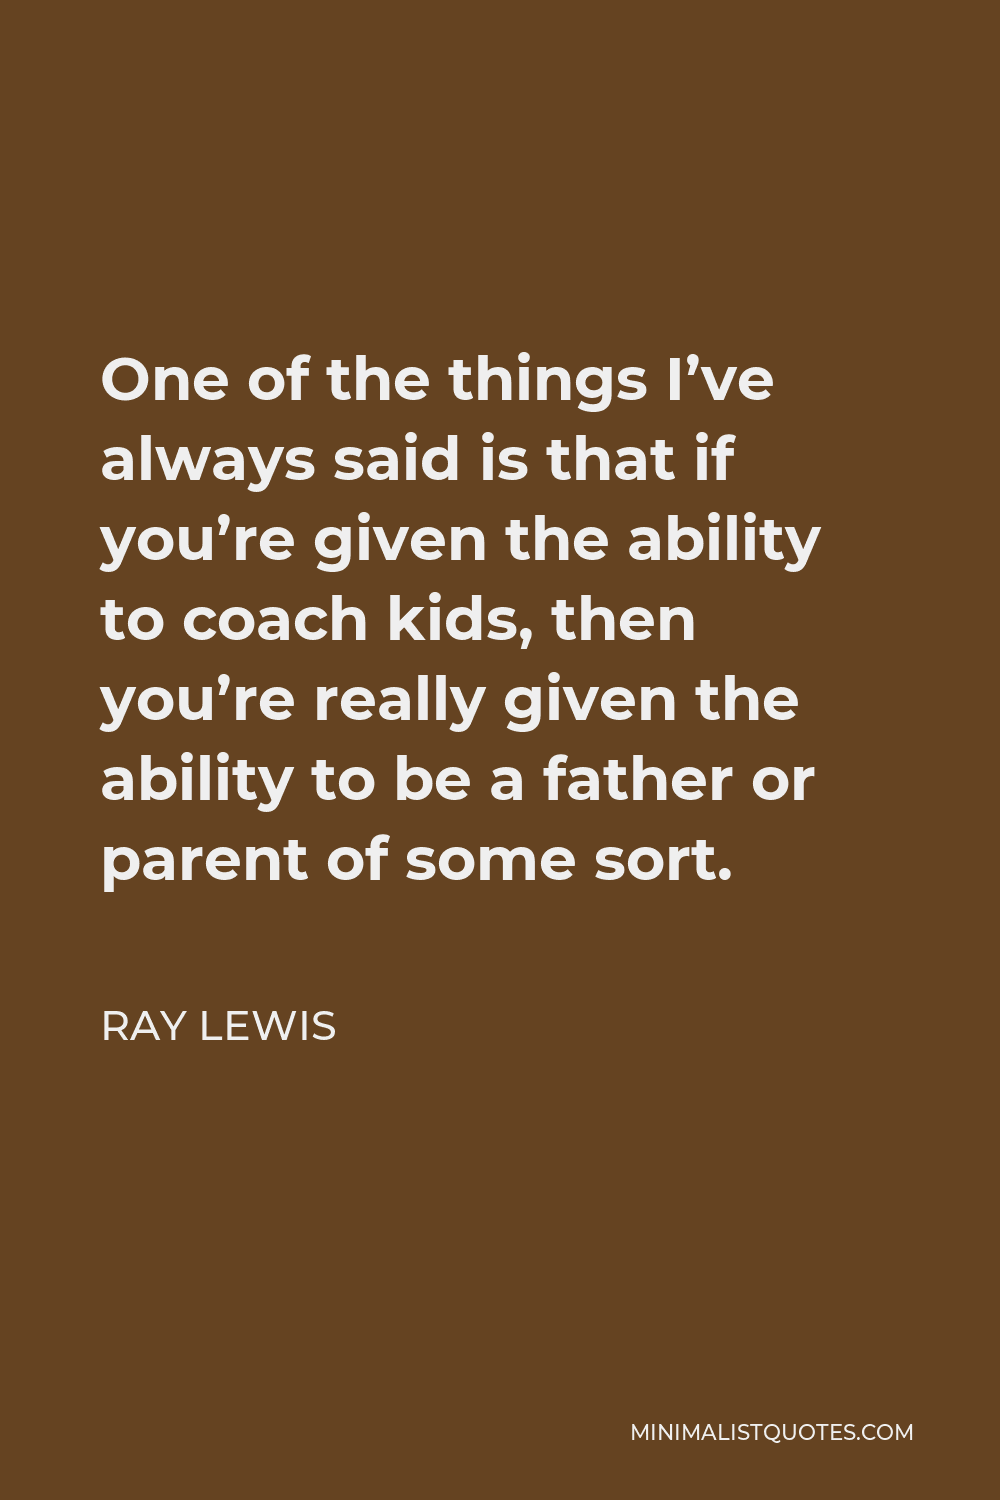 Ray Lewis Quote - One of the things I’ve always said is that if you’re given the ability to coach kids, then you’re really given the ability to be a father or parent of some sort.